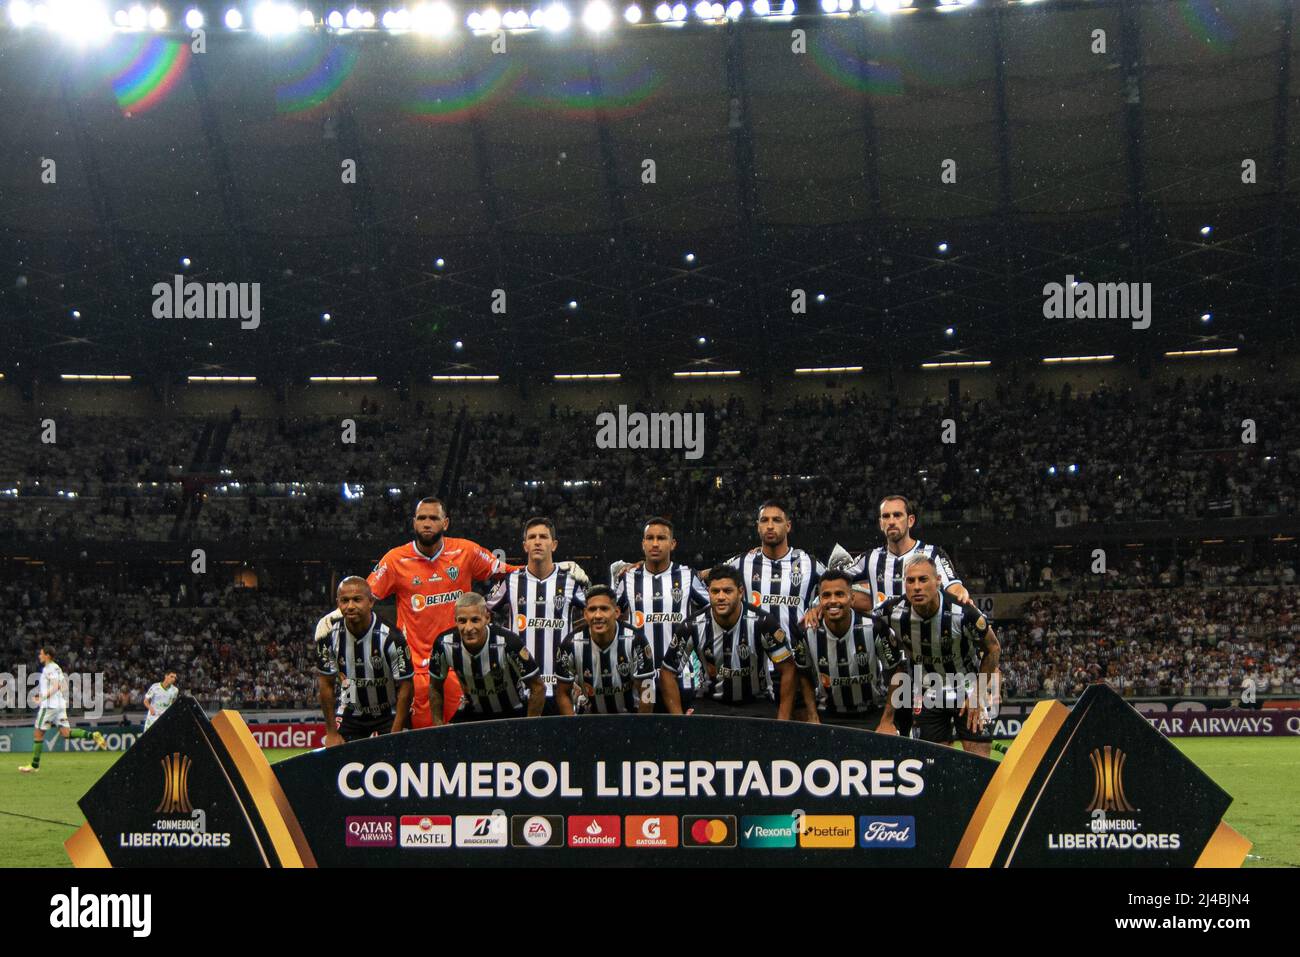 Belo Horizonte, Brazil. 13th Apr, 2022. MG - Belo Horizonte - 04/13/2022 - LIBERTADORES 2022 ATLETICO -MG X AMERICA-MG - Atletico-MG players pose for a photo before the match against America-MG at Mineirao stadium for the Copa Libertadores 2022 championship. Photo: Alessandra Torres/ Credit: AGIF/Alamy Live News Stock Photo